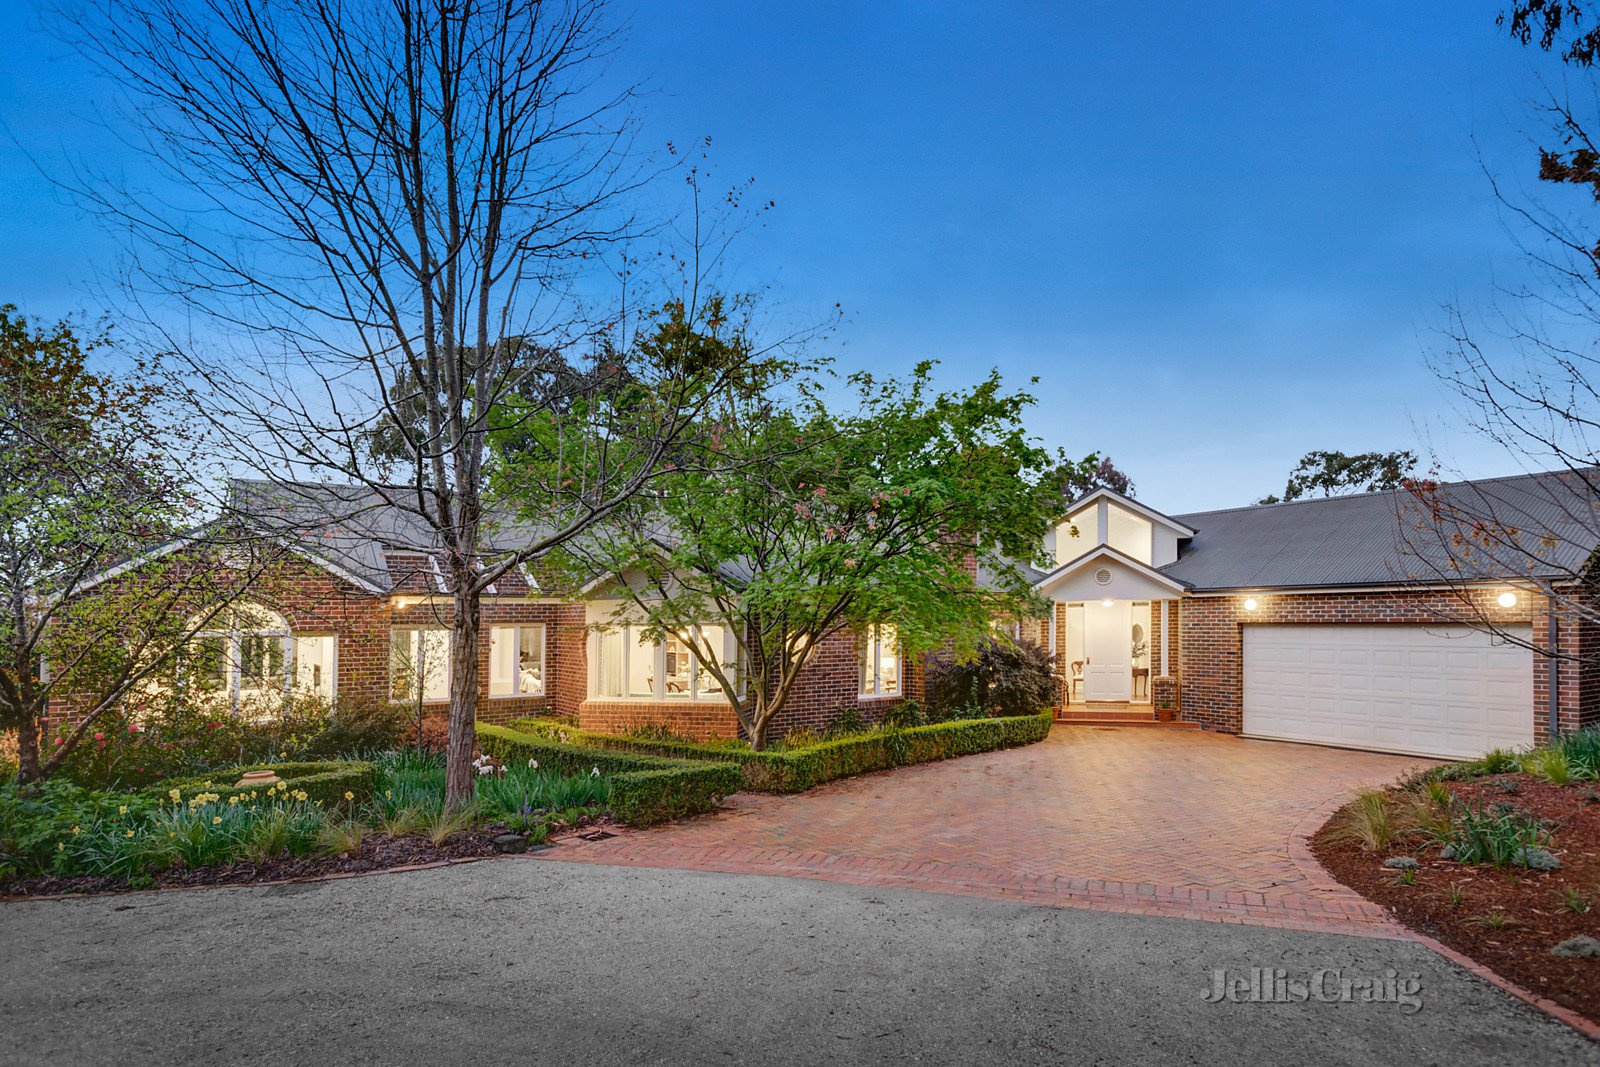 34 Williams Road, Park Orchards - Image 1